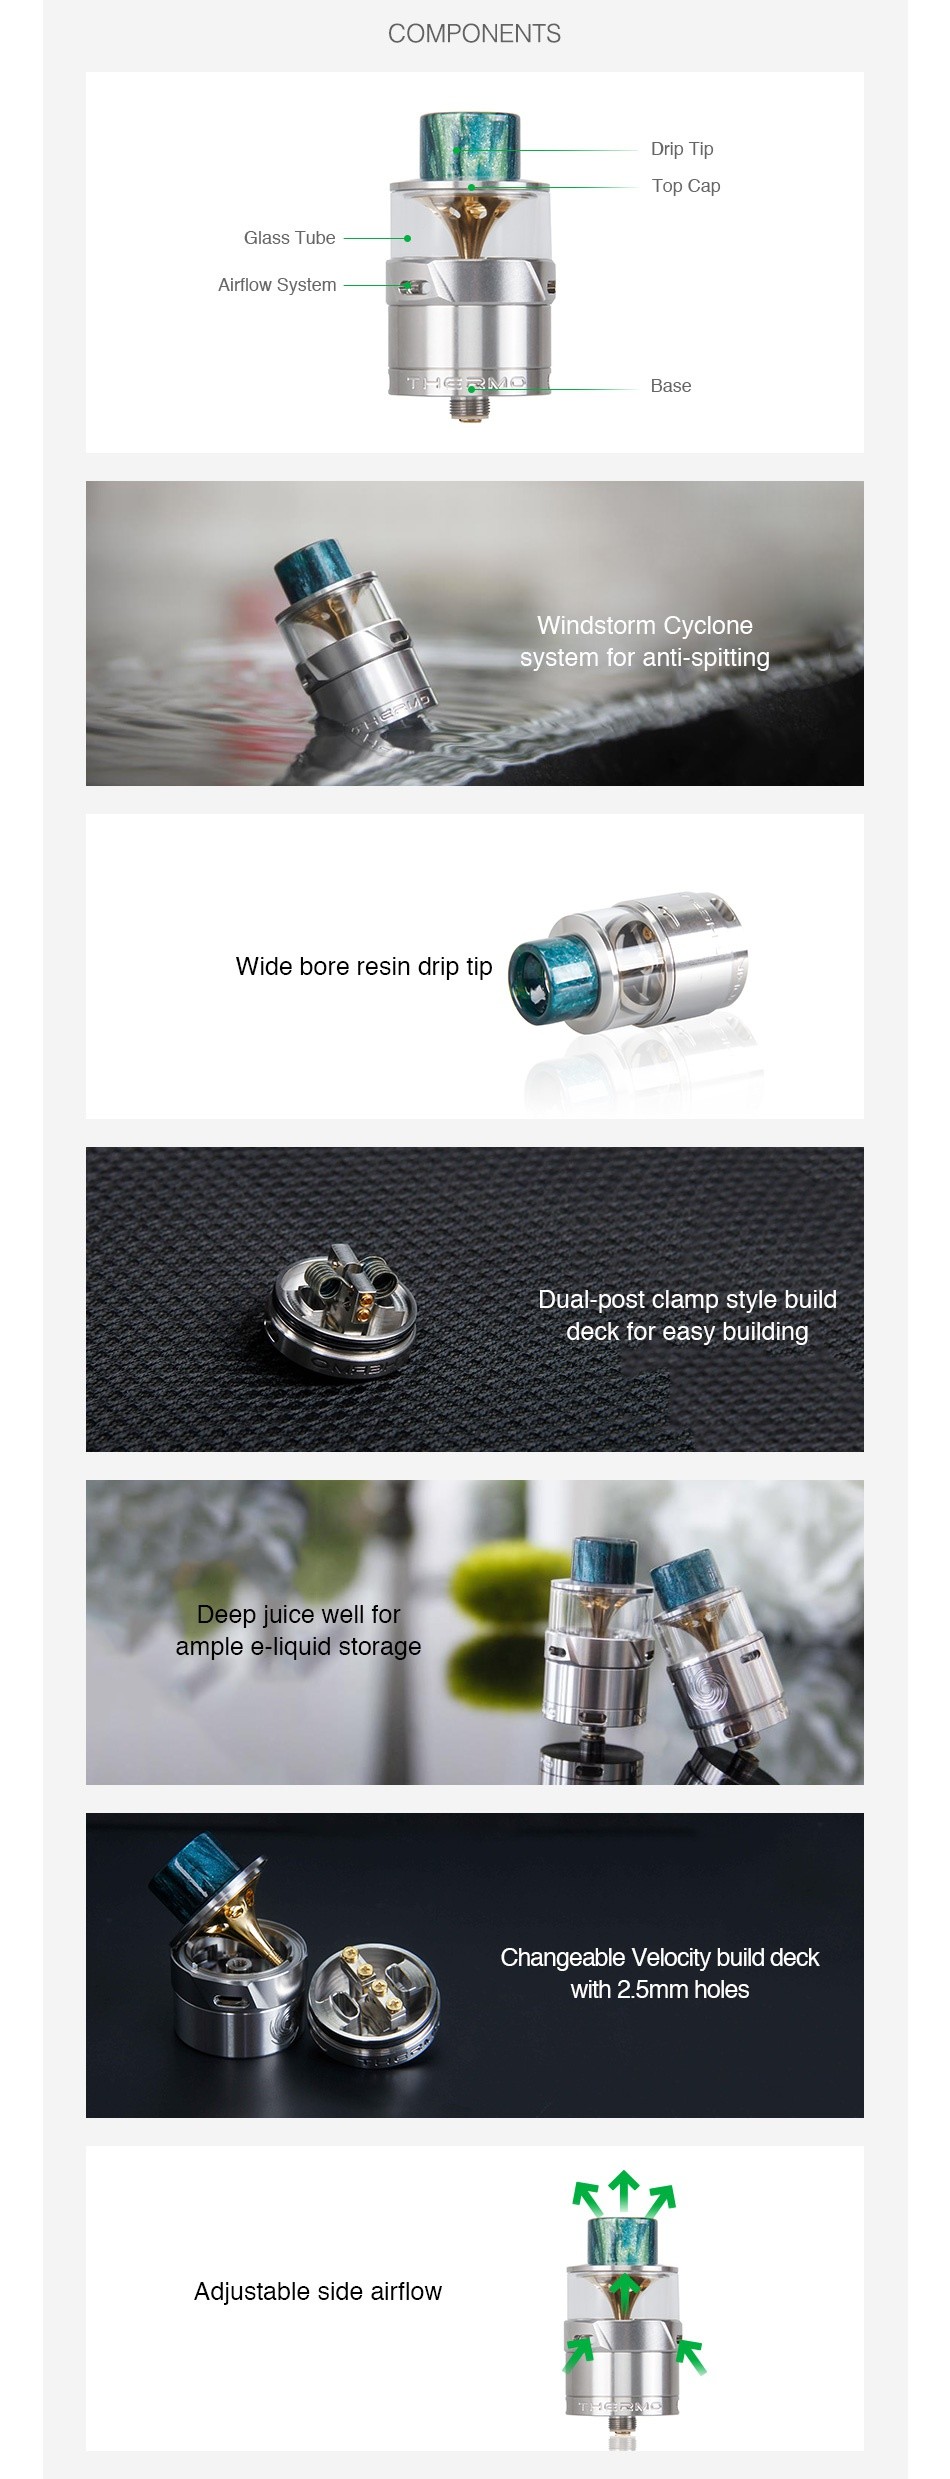 Innokin Thermo RDA COMPONENTS rip I p w Sysle  Base Windstorm Cyclone system for antl spItting Wide bore resin drip tip Dual post clamp style build deck for easy building Deep juice well for ample e liquid storage Changeable Velocity buld deck with 2  5mm holes R  Adjustable side airflow